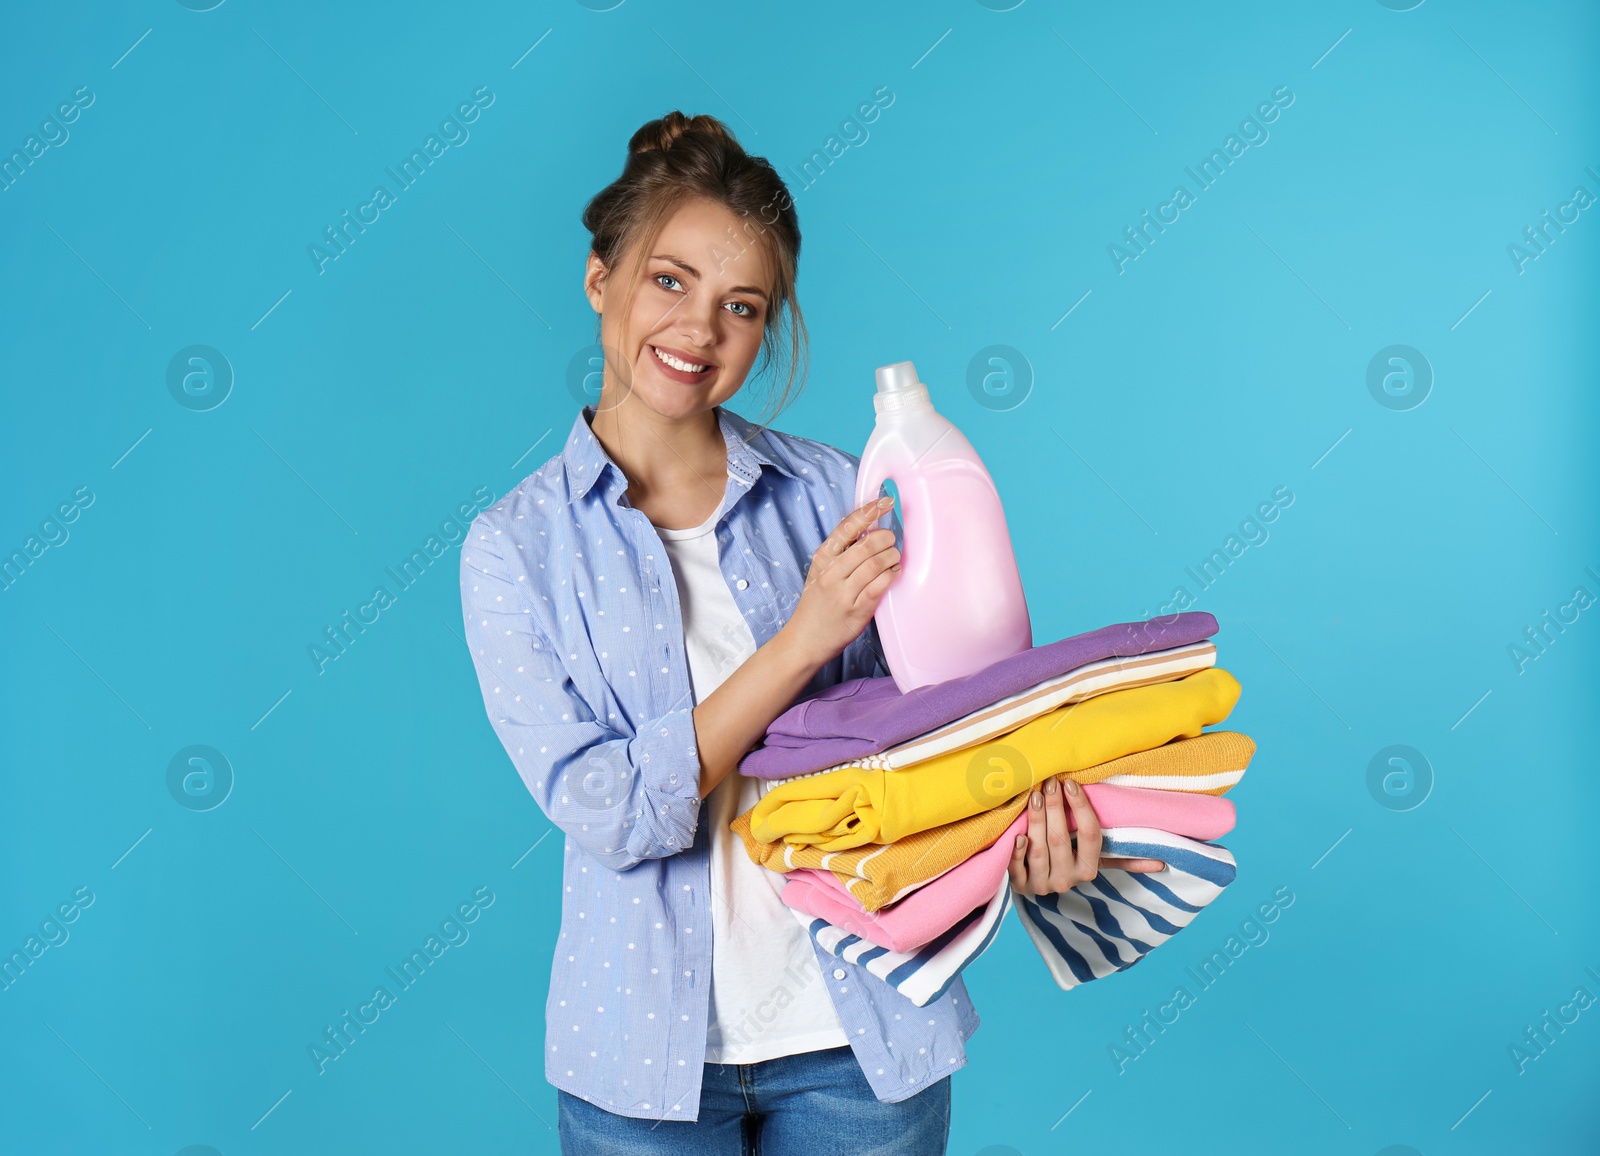 Photo of Happy young woman holding clean clothes and laundry detergent on color background